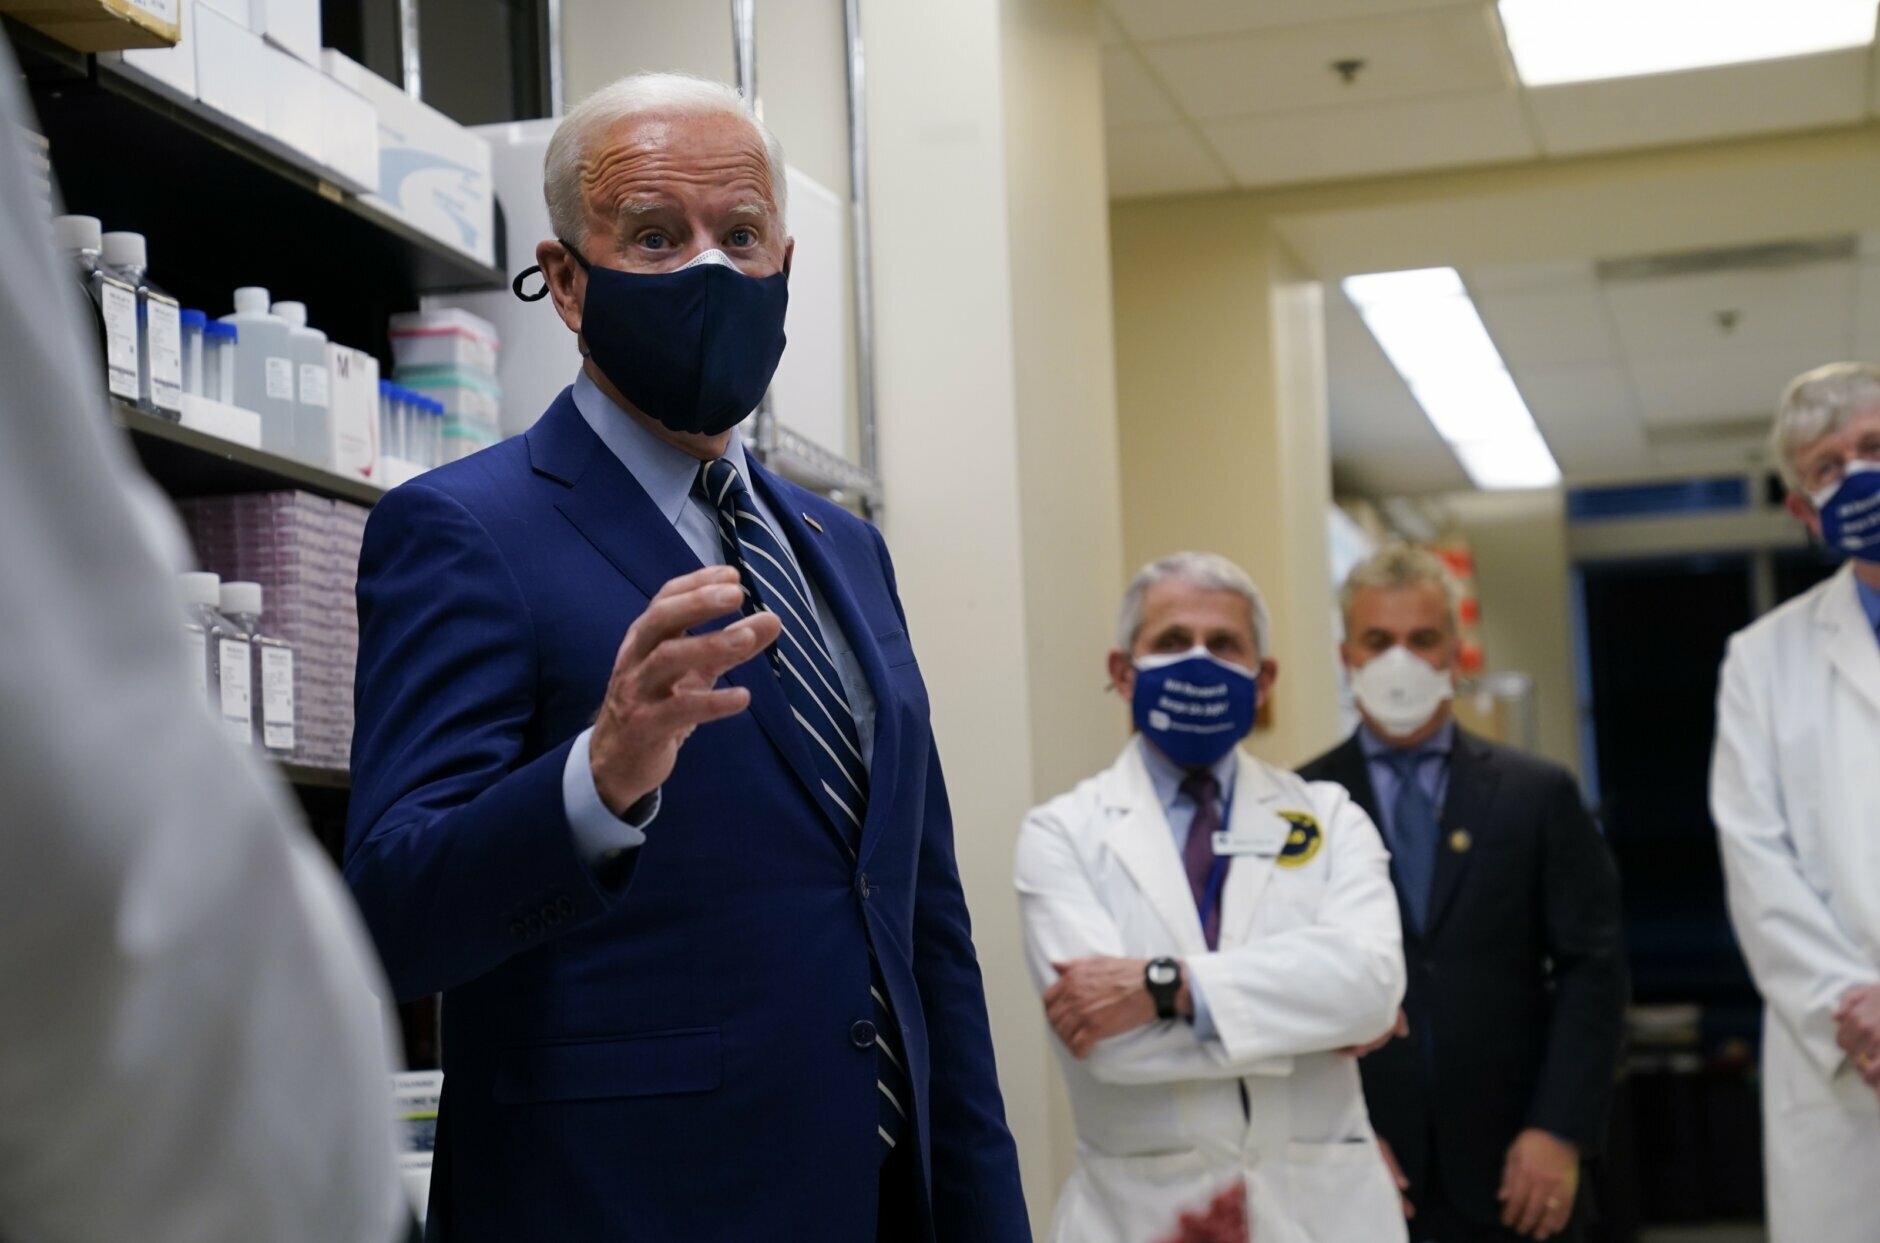 President Joe Biden speaks during a visit at the Viral Pathogenesis Laboratory at the National Institutes of Health (NIH), Thursday, Feb. 11, 2021, in Bethesda, Md. Dr. Anthony Fauci, director of the National Institute of Allergy and Infectious Diseases and NIH Director Francis Collins listen. (AP Photo/Evan Vucci)